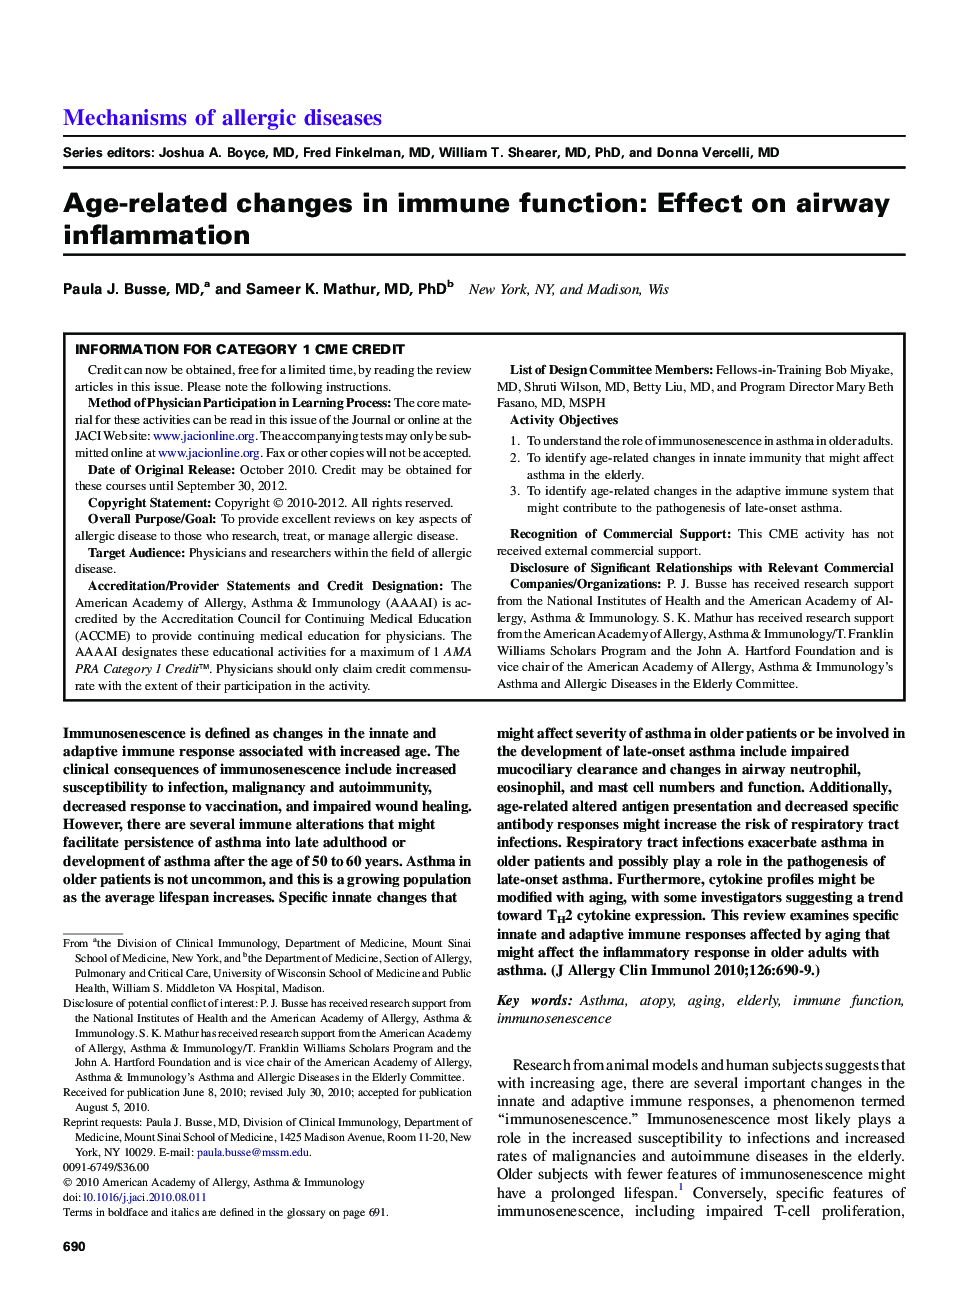 Age-related changes in immune function: Effect on airway inflammation 